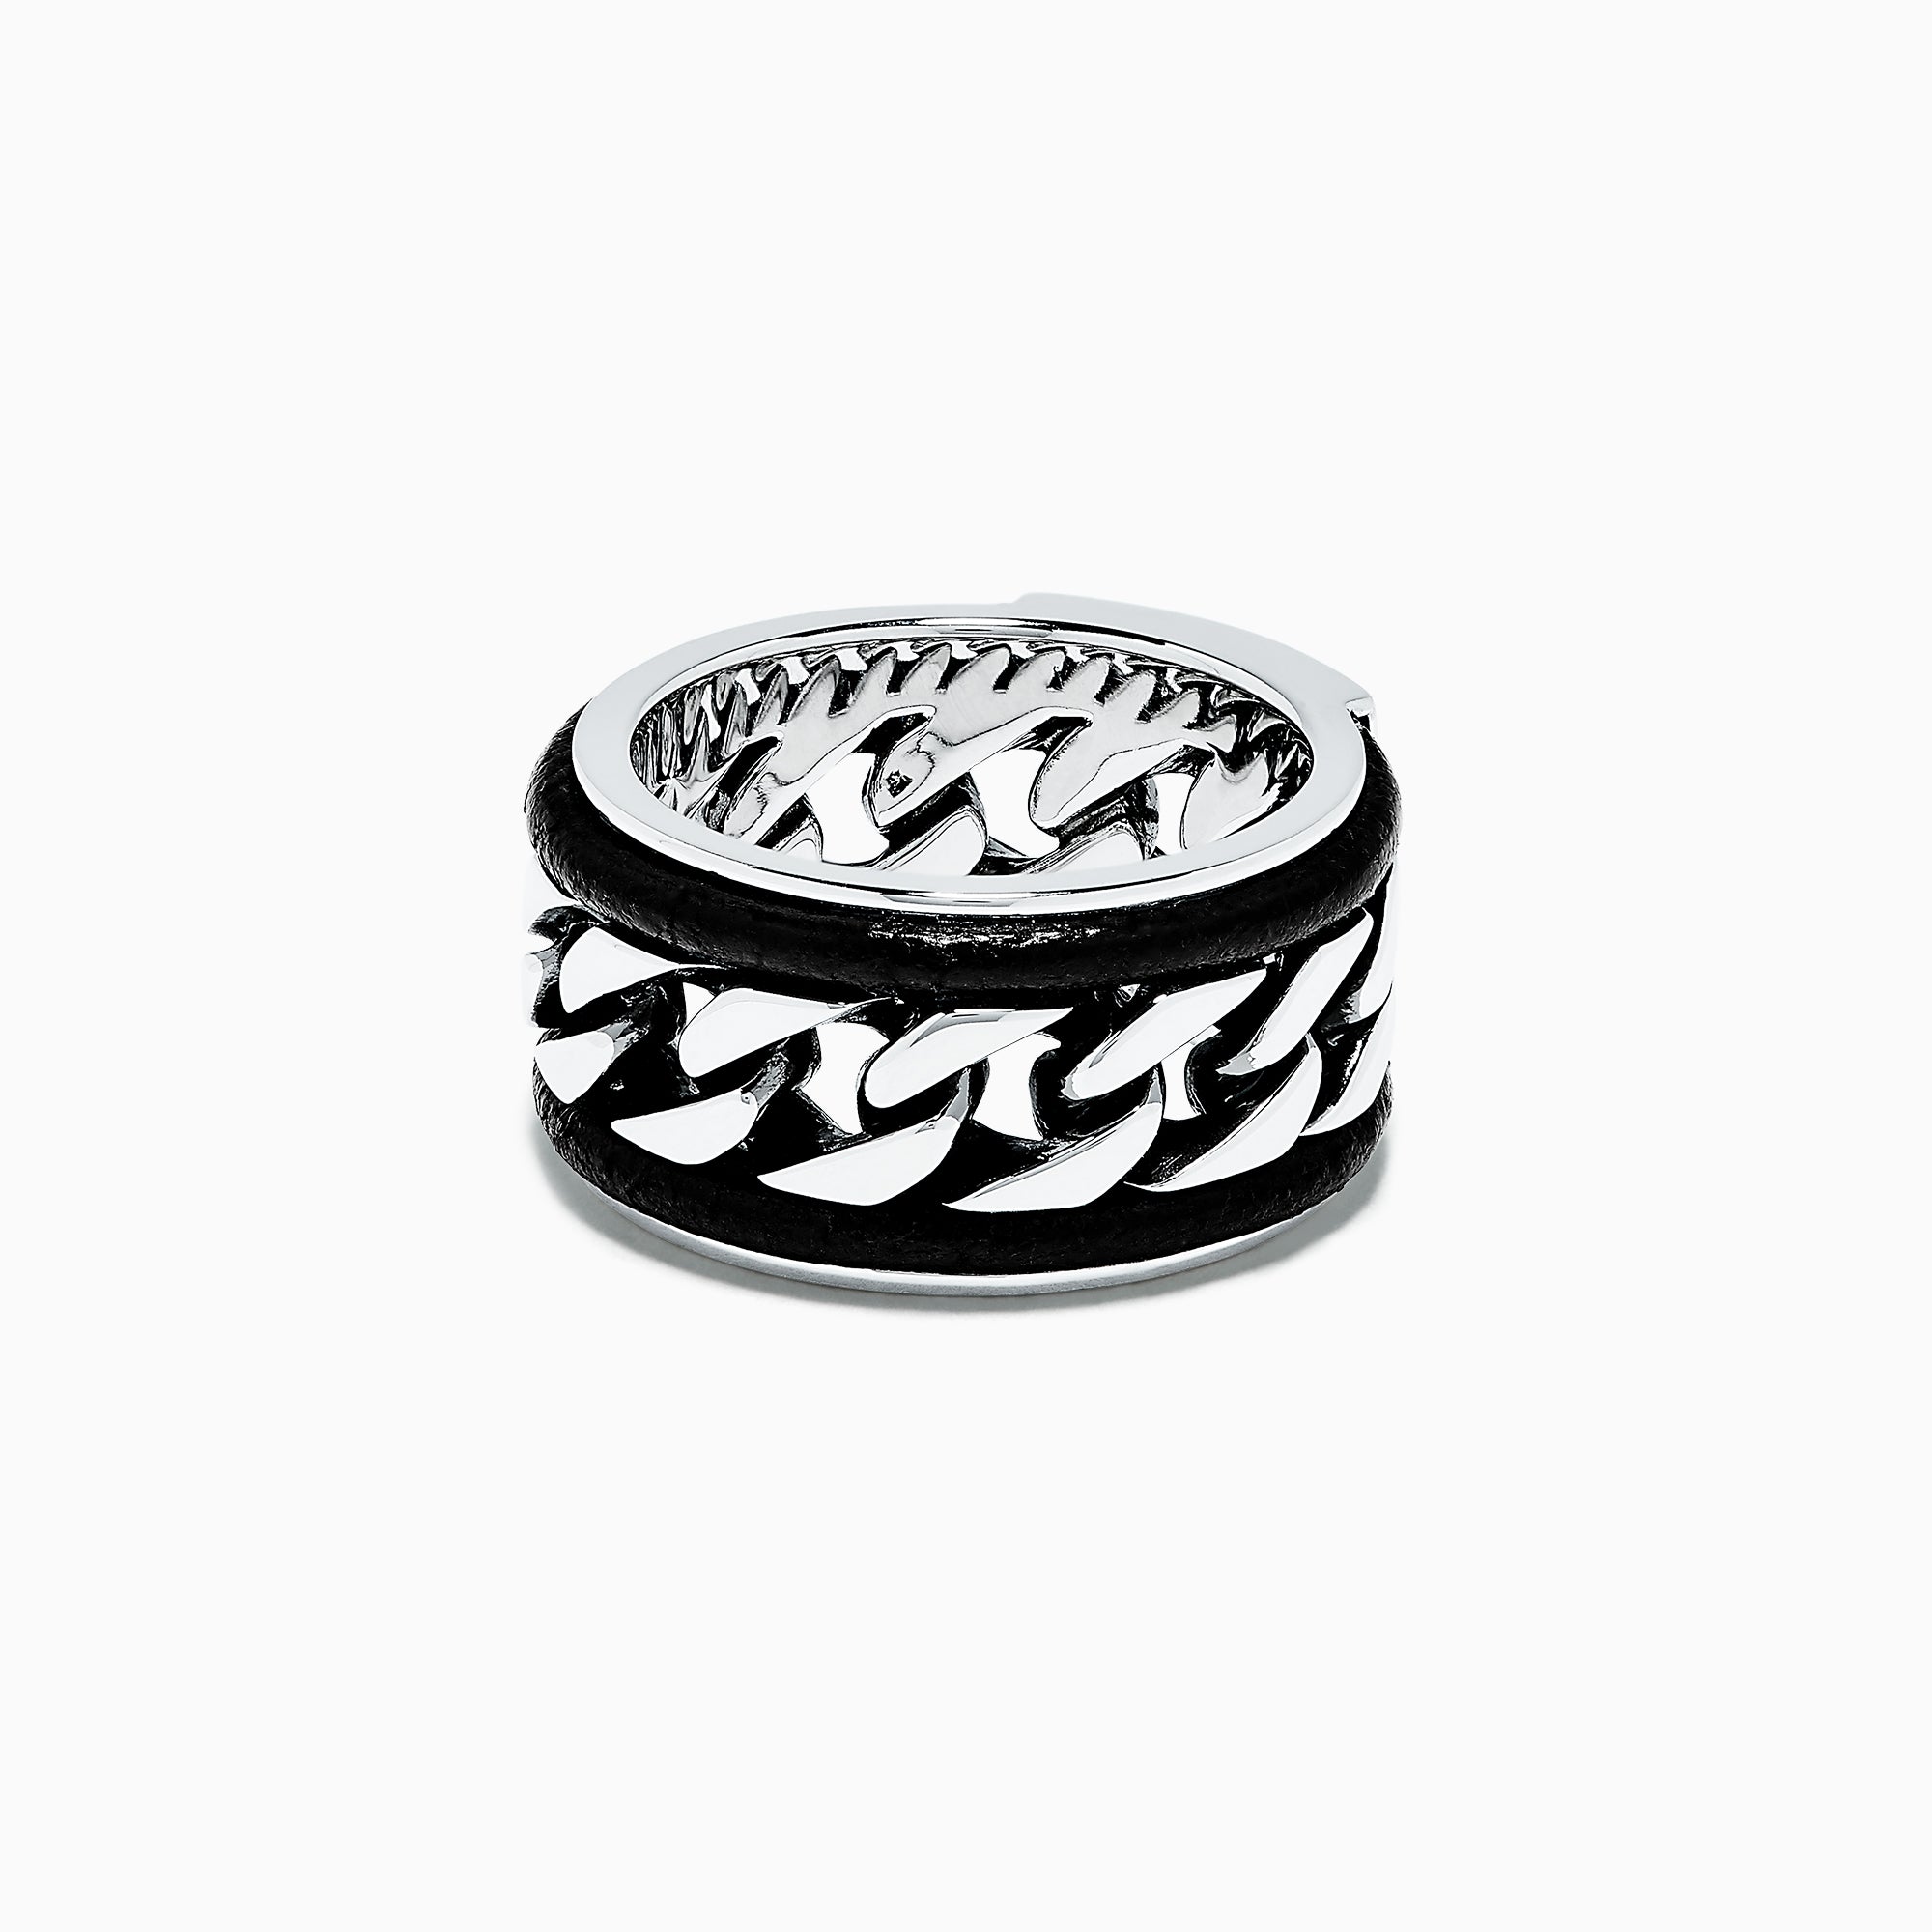 Effy Men's Sterling Silver and Leather Ring